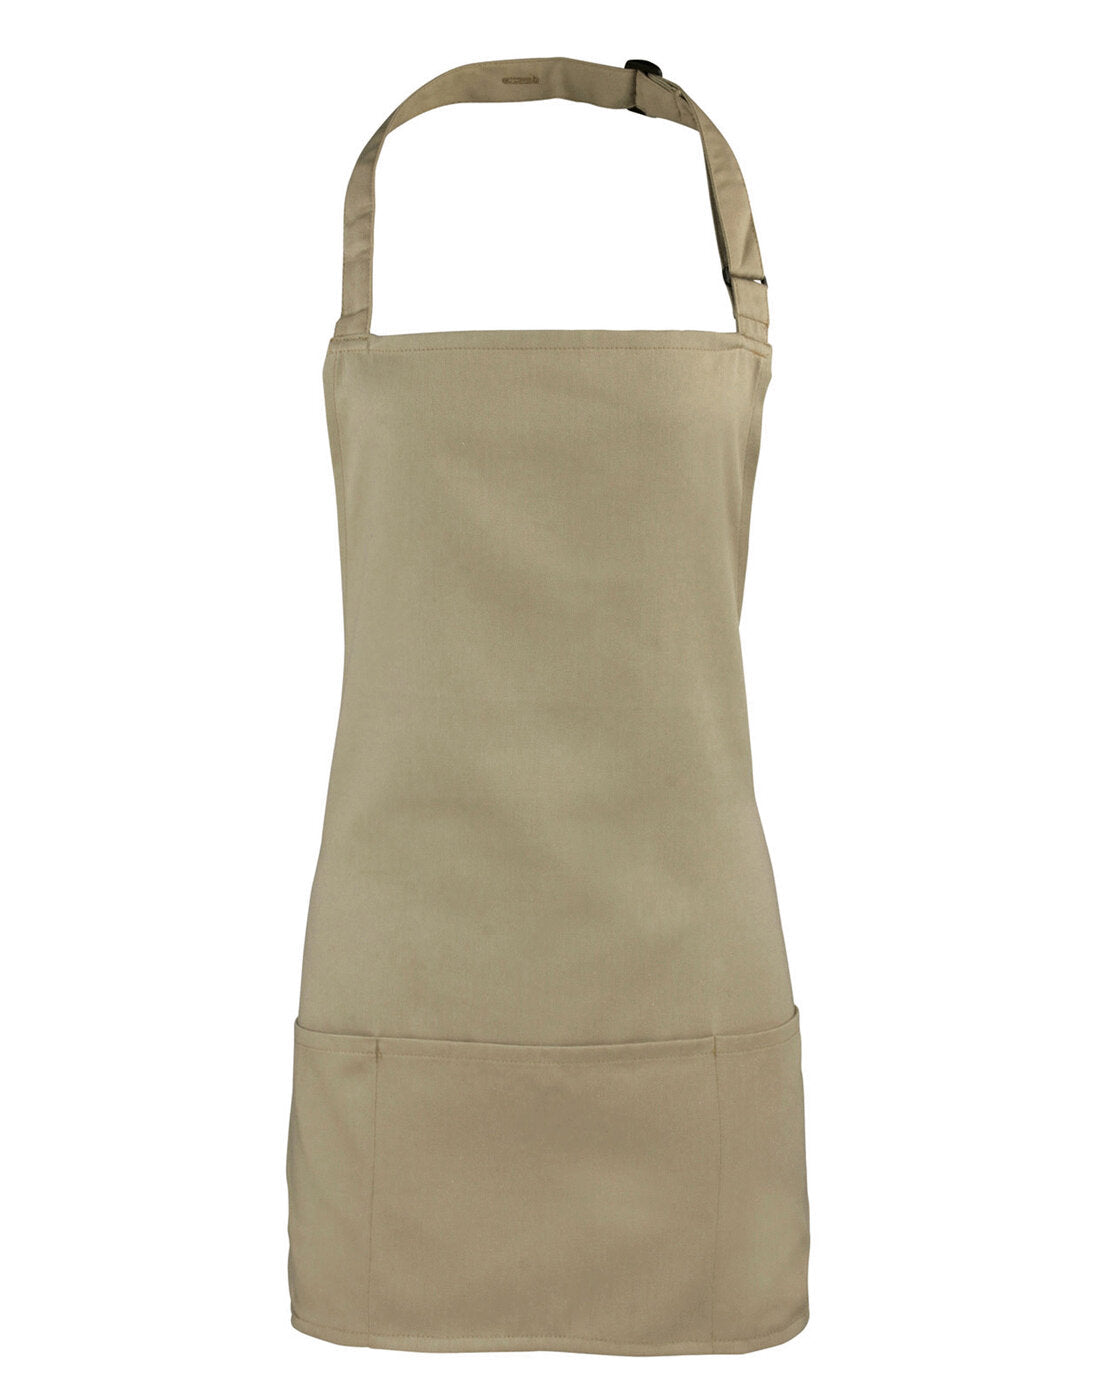 Personalised Premier Colours Collection 2 in 1 Apron